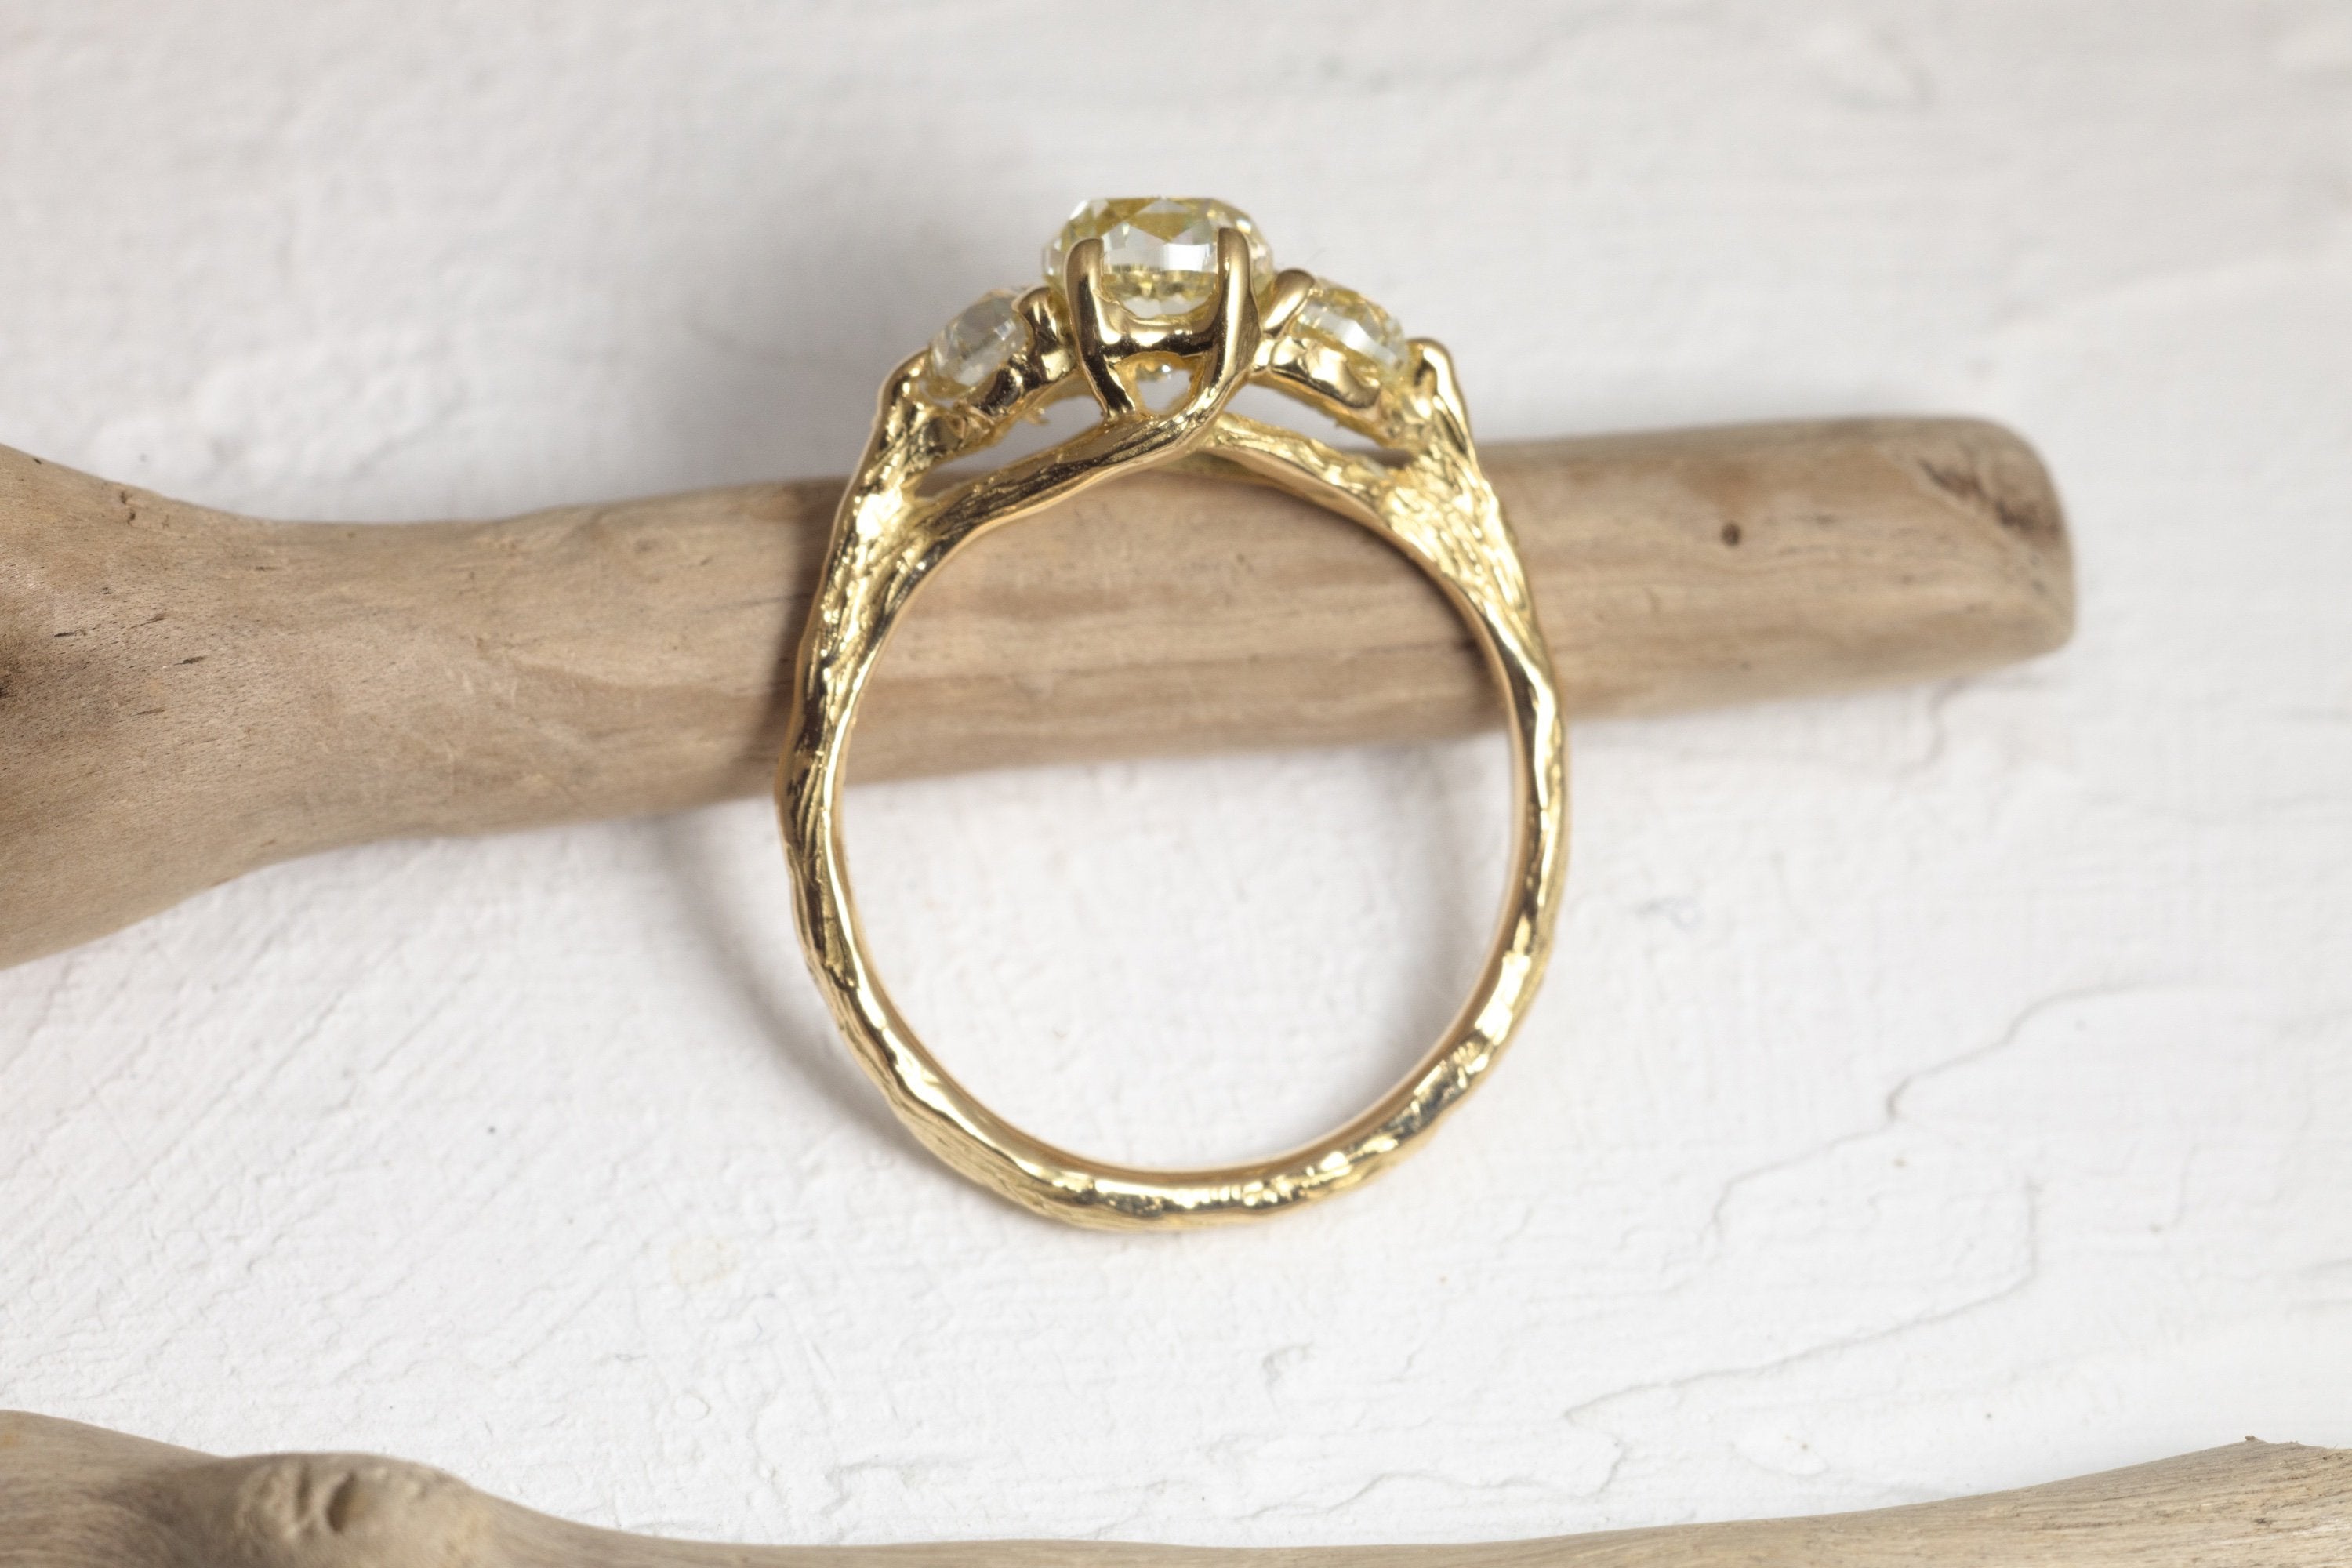 Three Antique Diamond Engagement Ring with Branch Texture (18k)